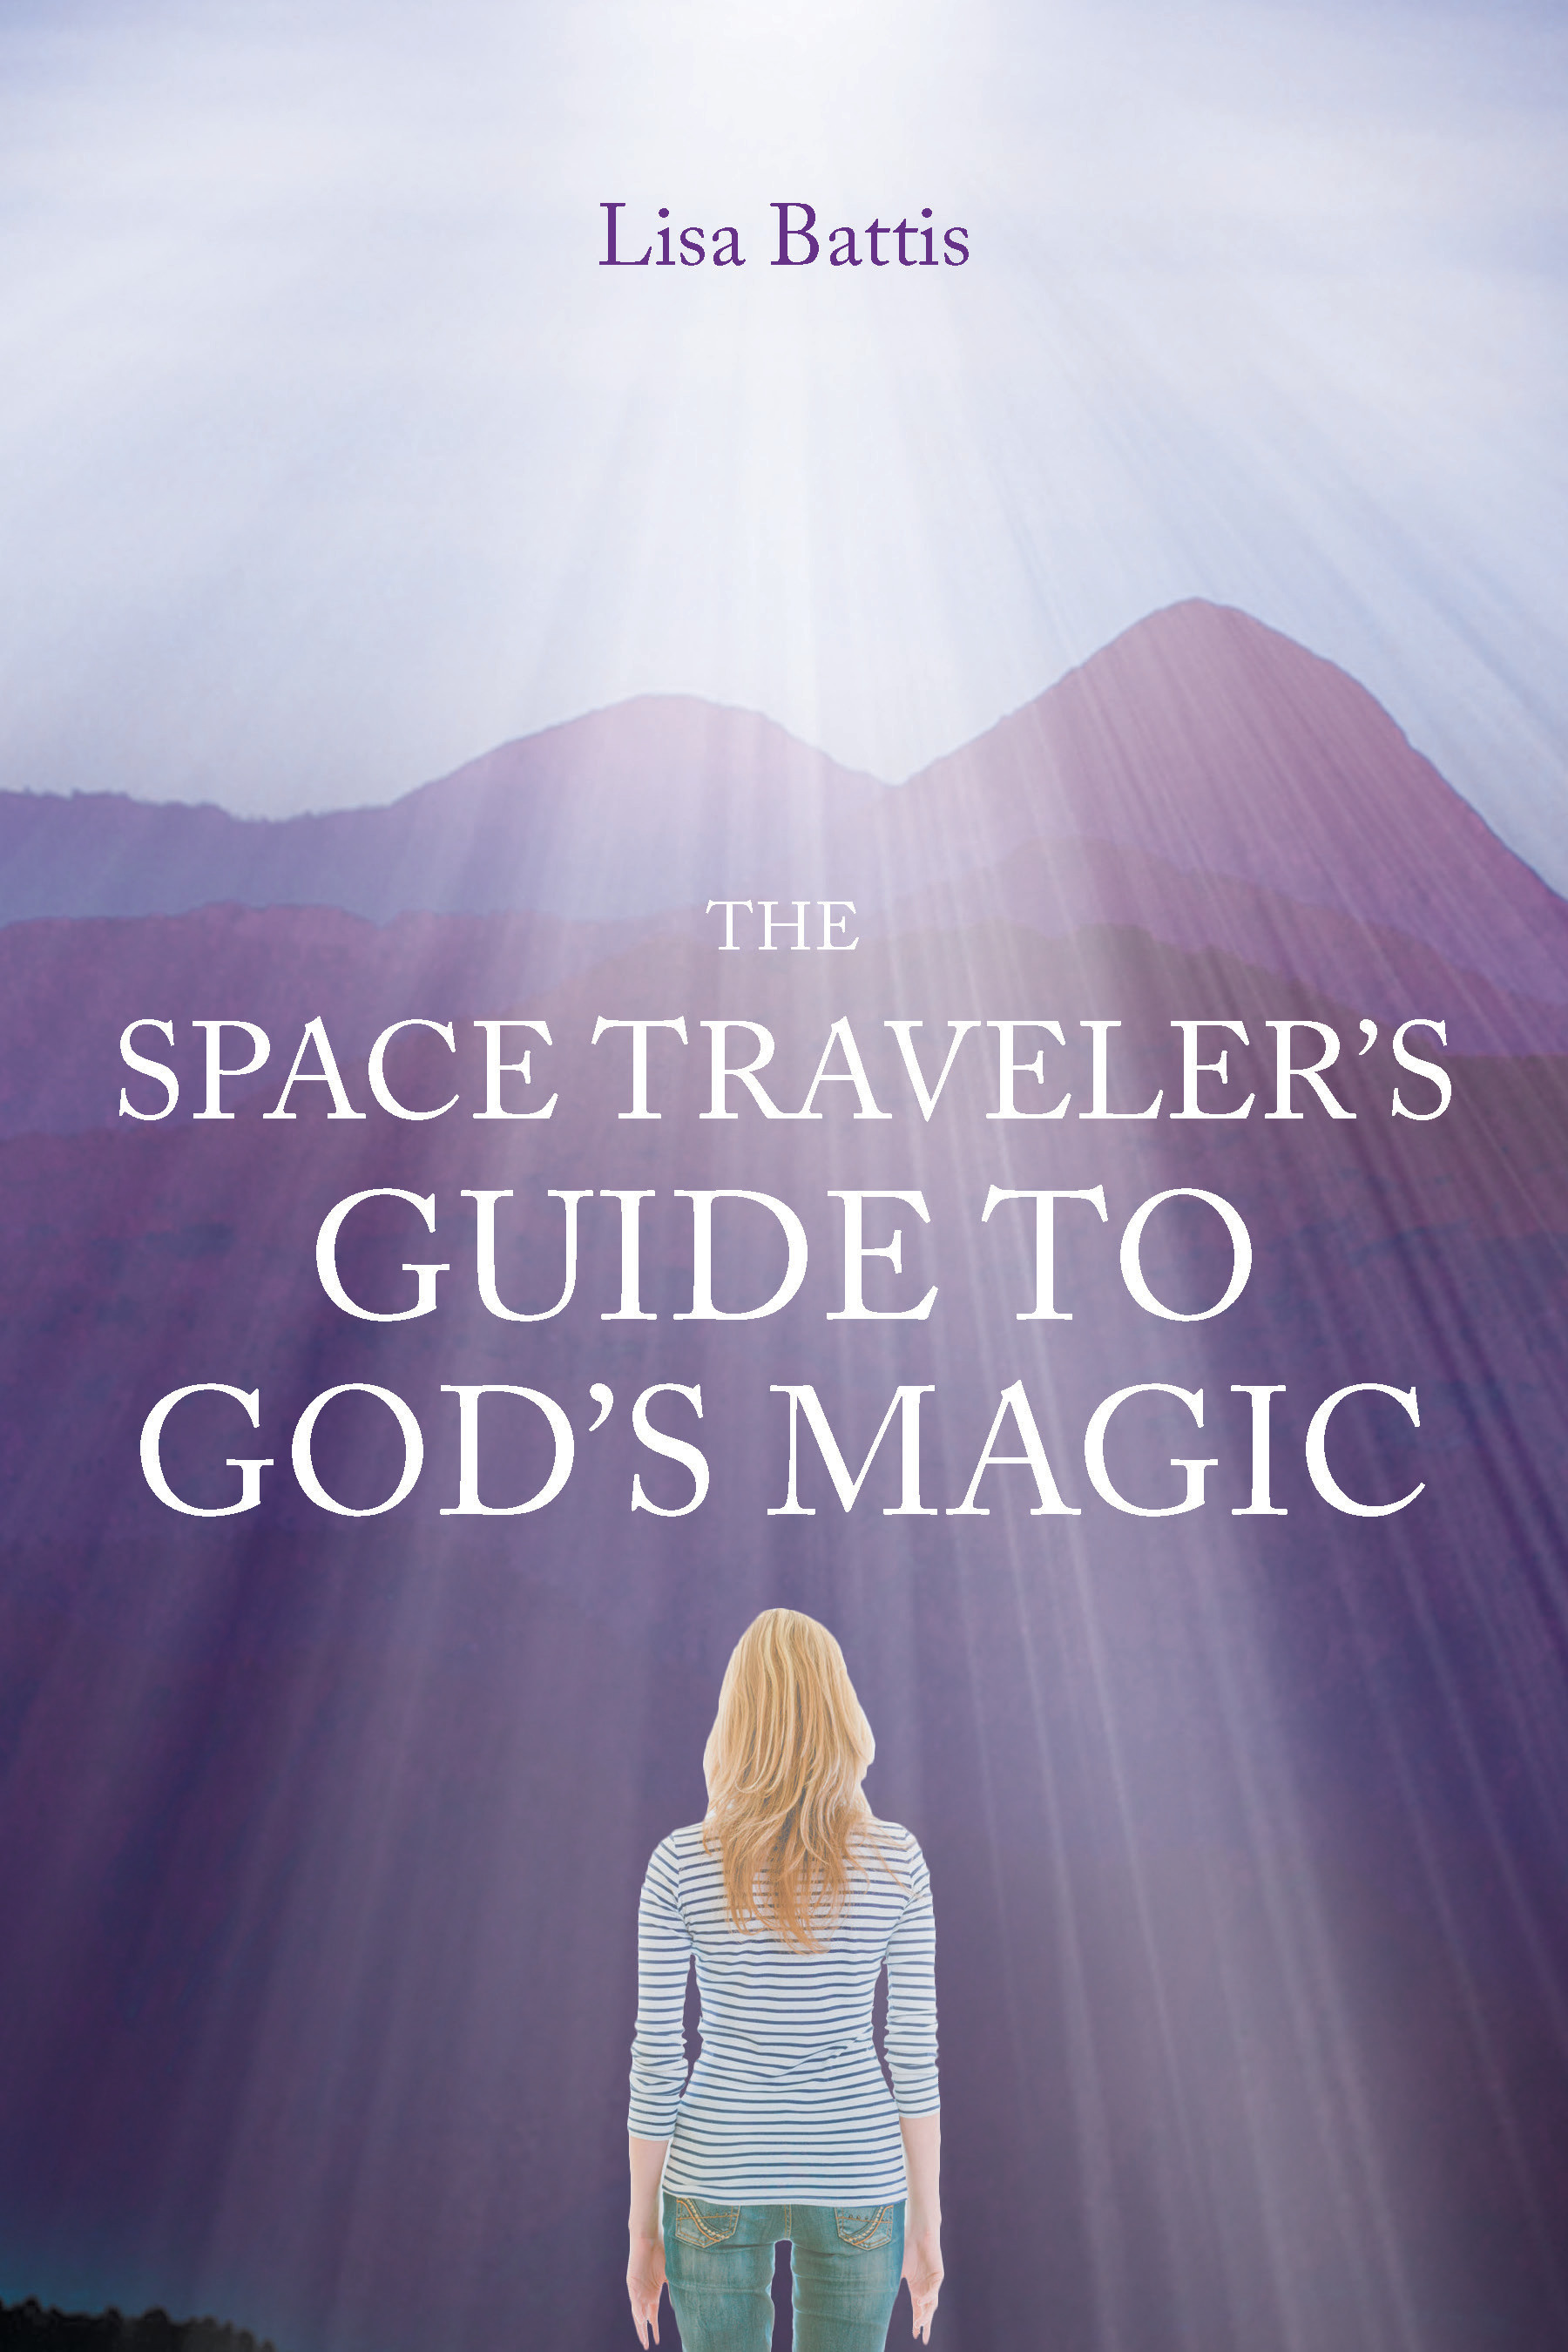 Author Lisa Battis’s New Book, "The Space Traveler's Guide to God's Magic," is an Insightful Tool to Enhance One's Perception of the World and Connection with God